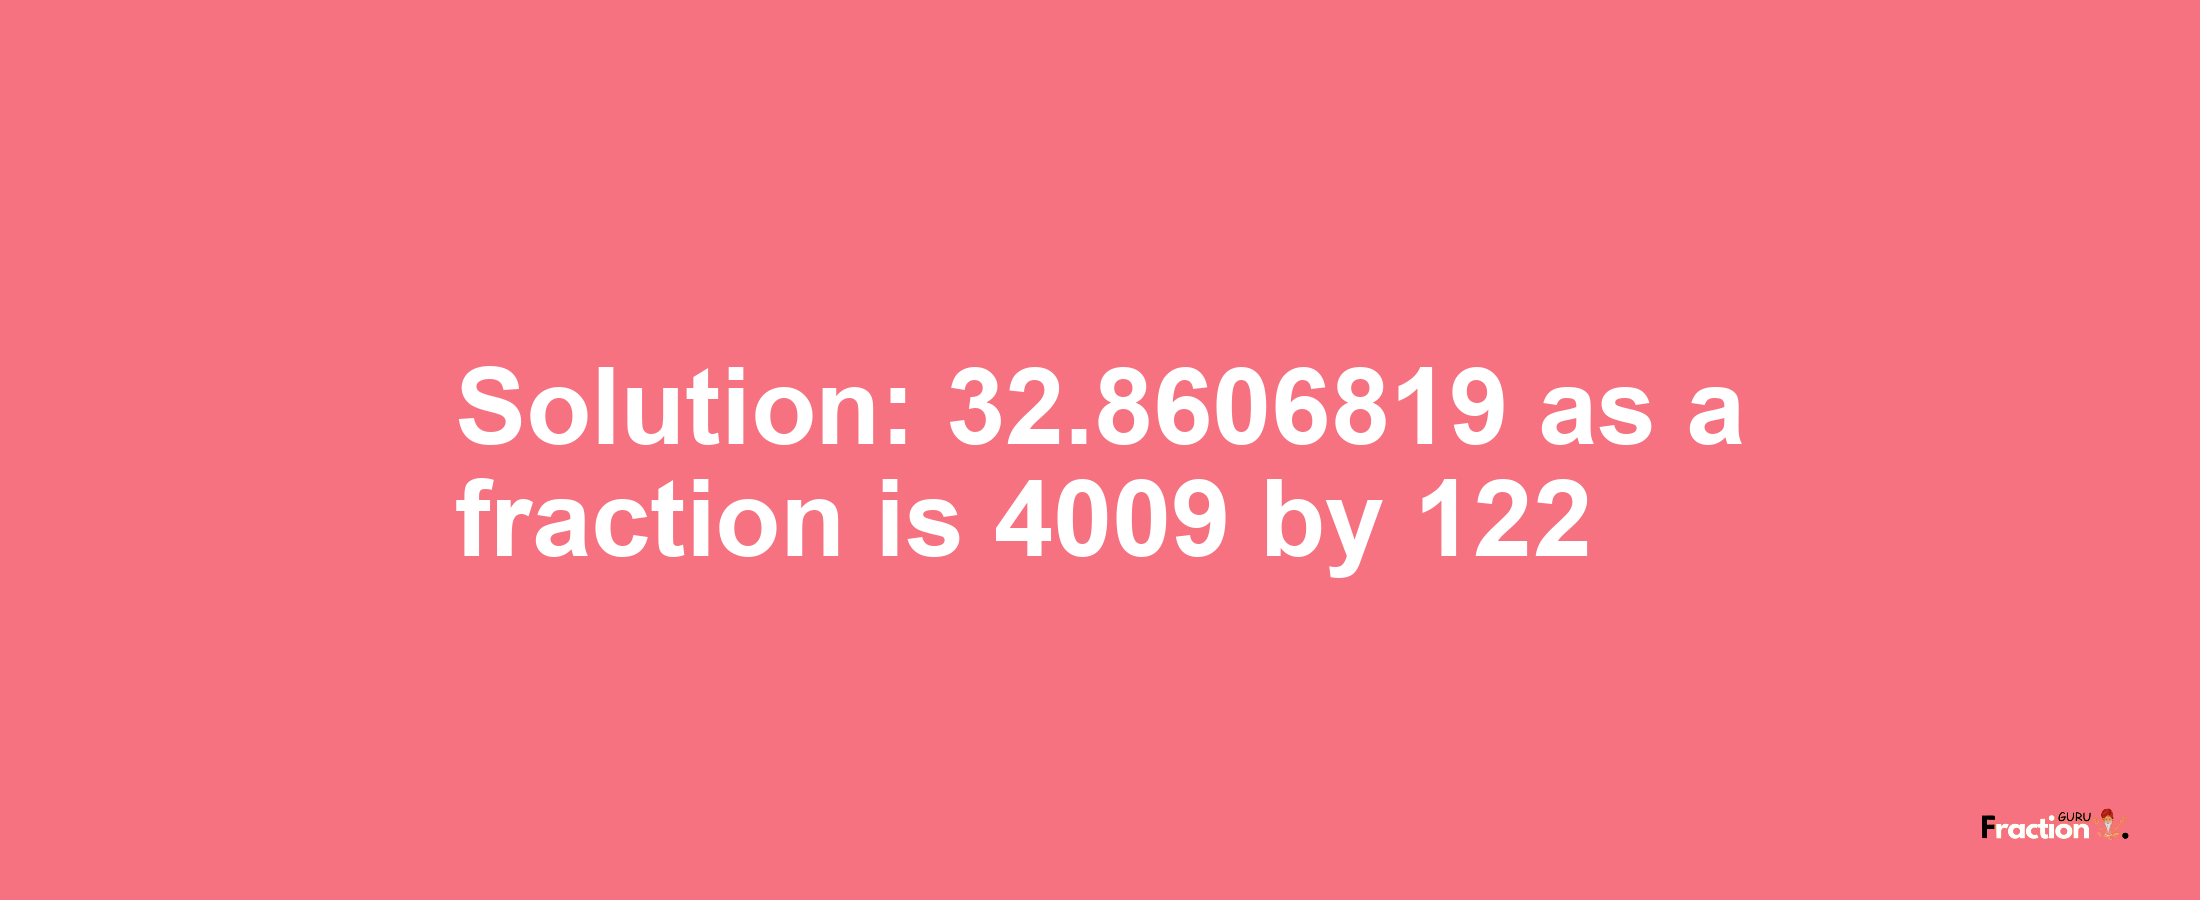 Solution:32.8606819 as a fraction is 4009/122